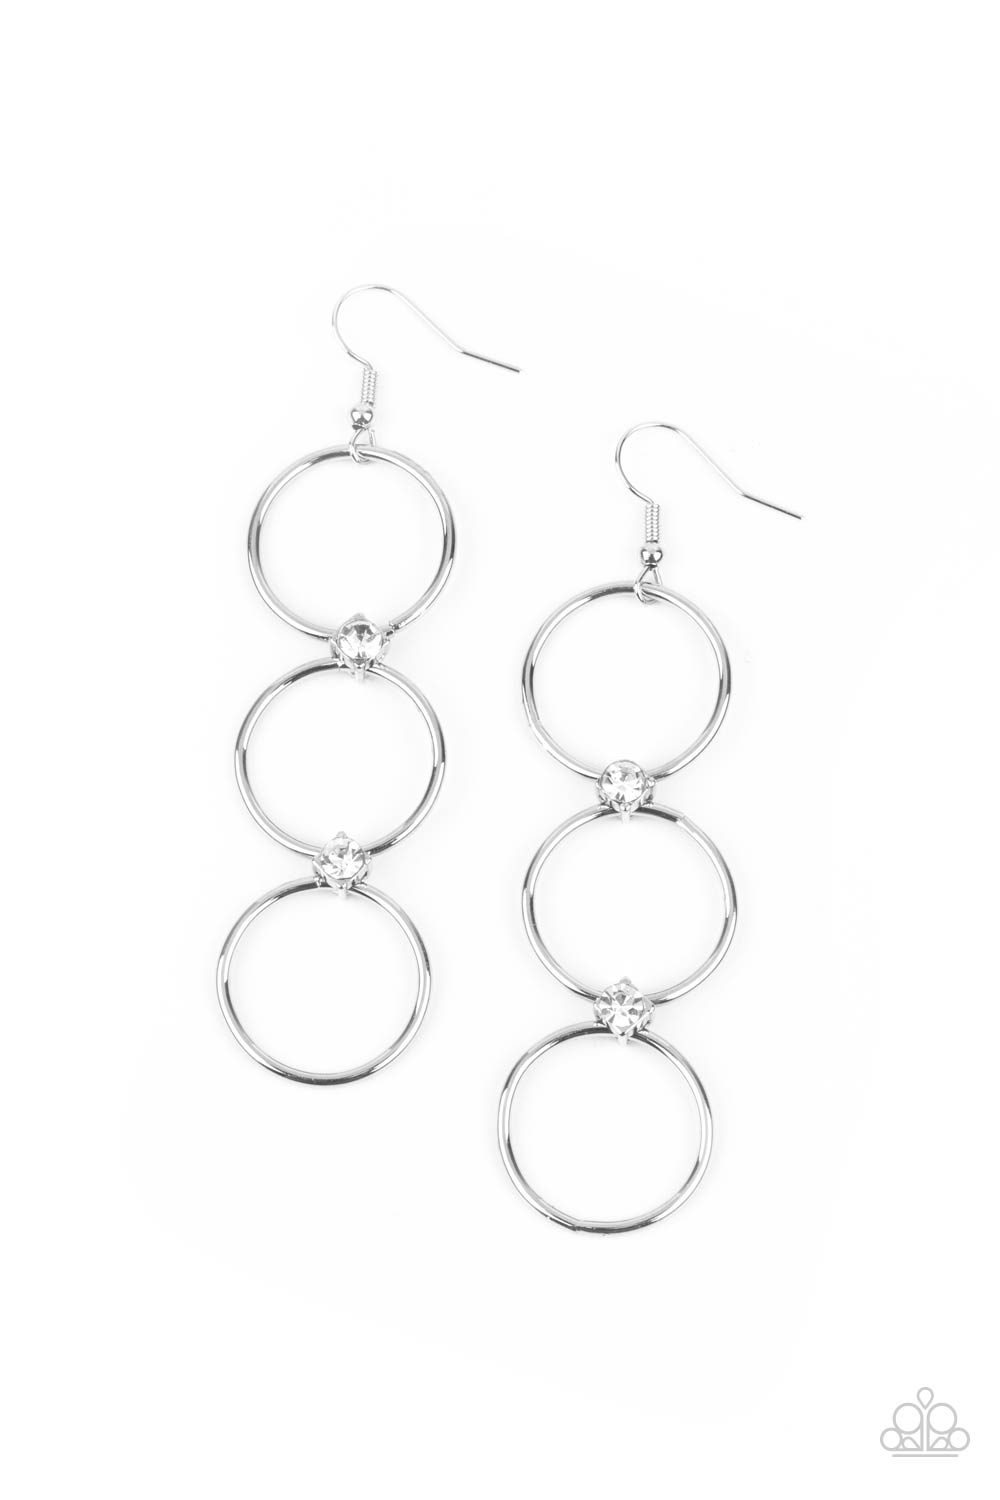 Paparazzi Refined Society - White Earrings - A Finishing Touch Jewelry